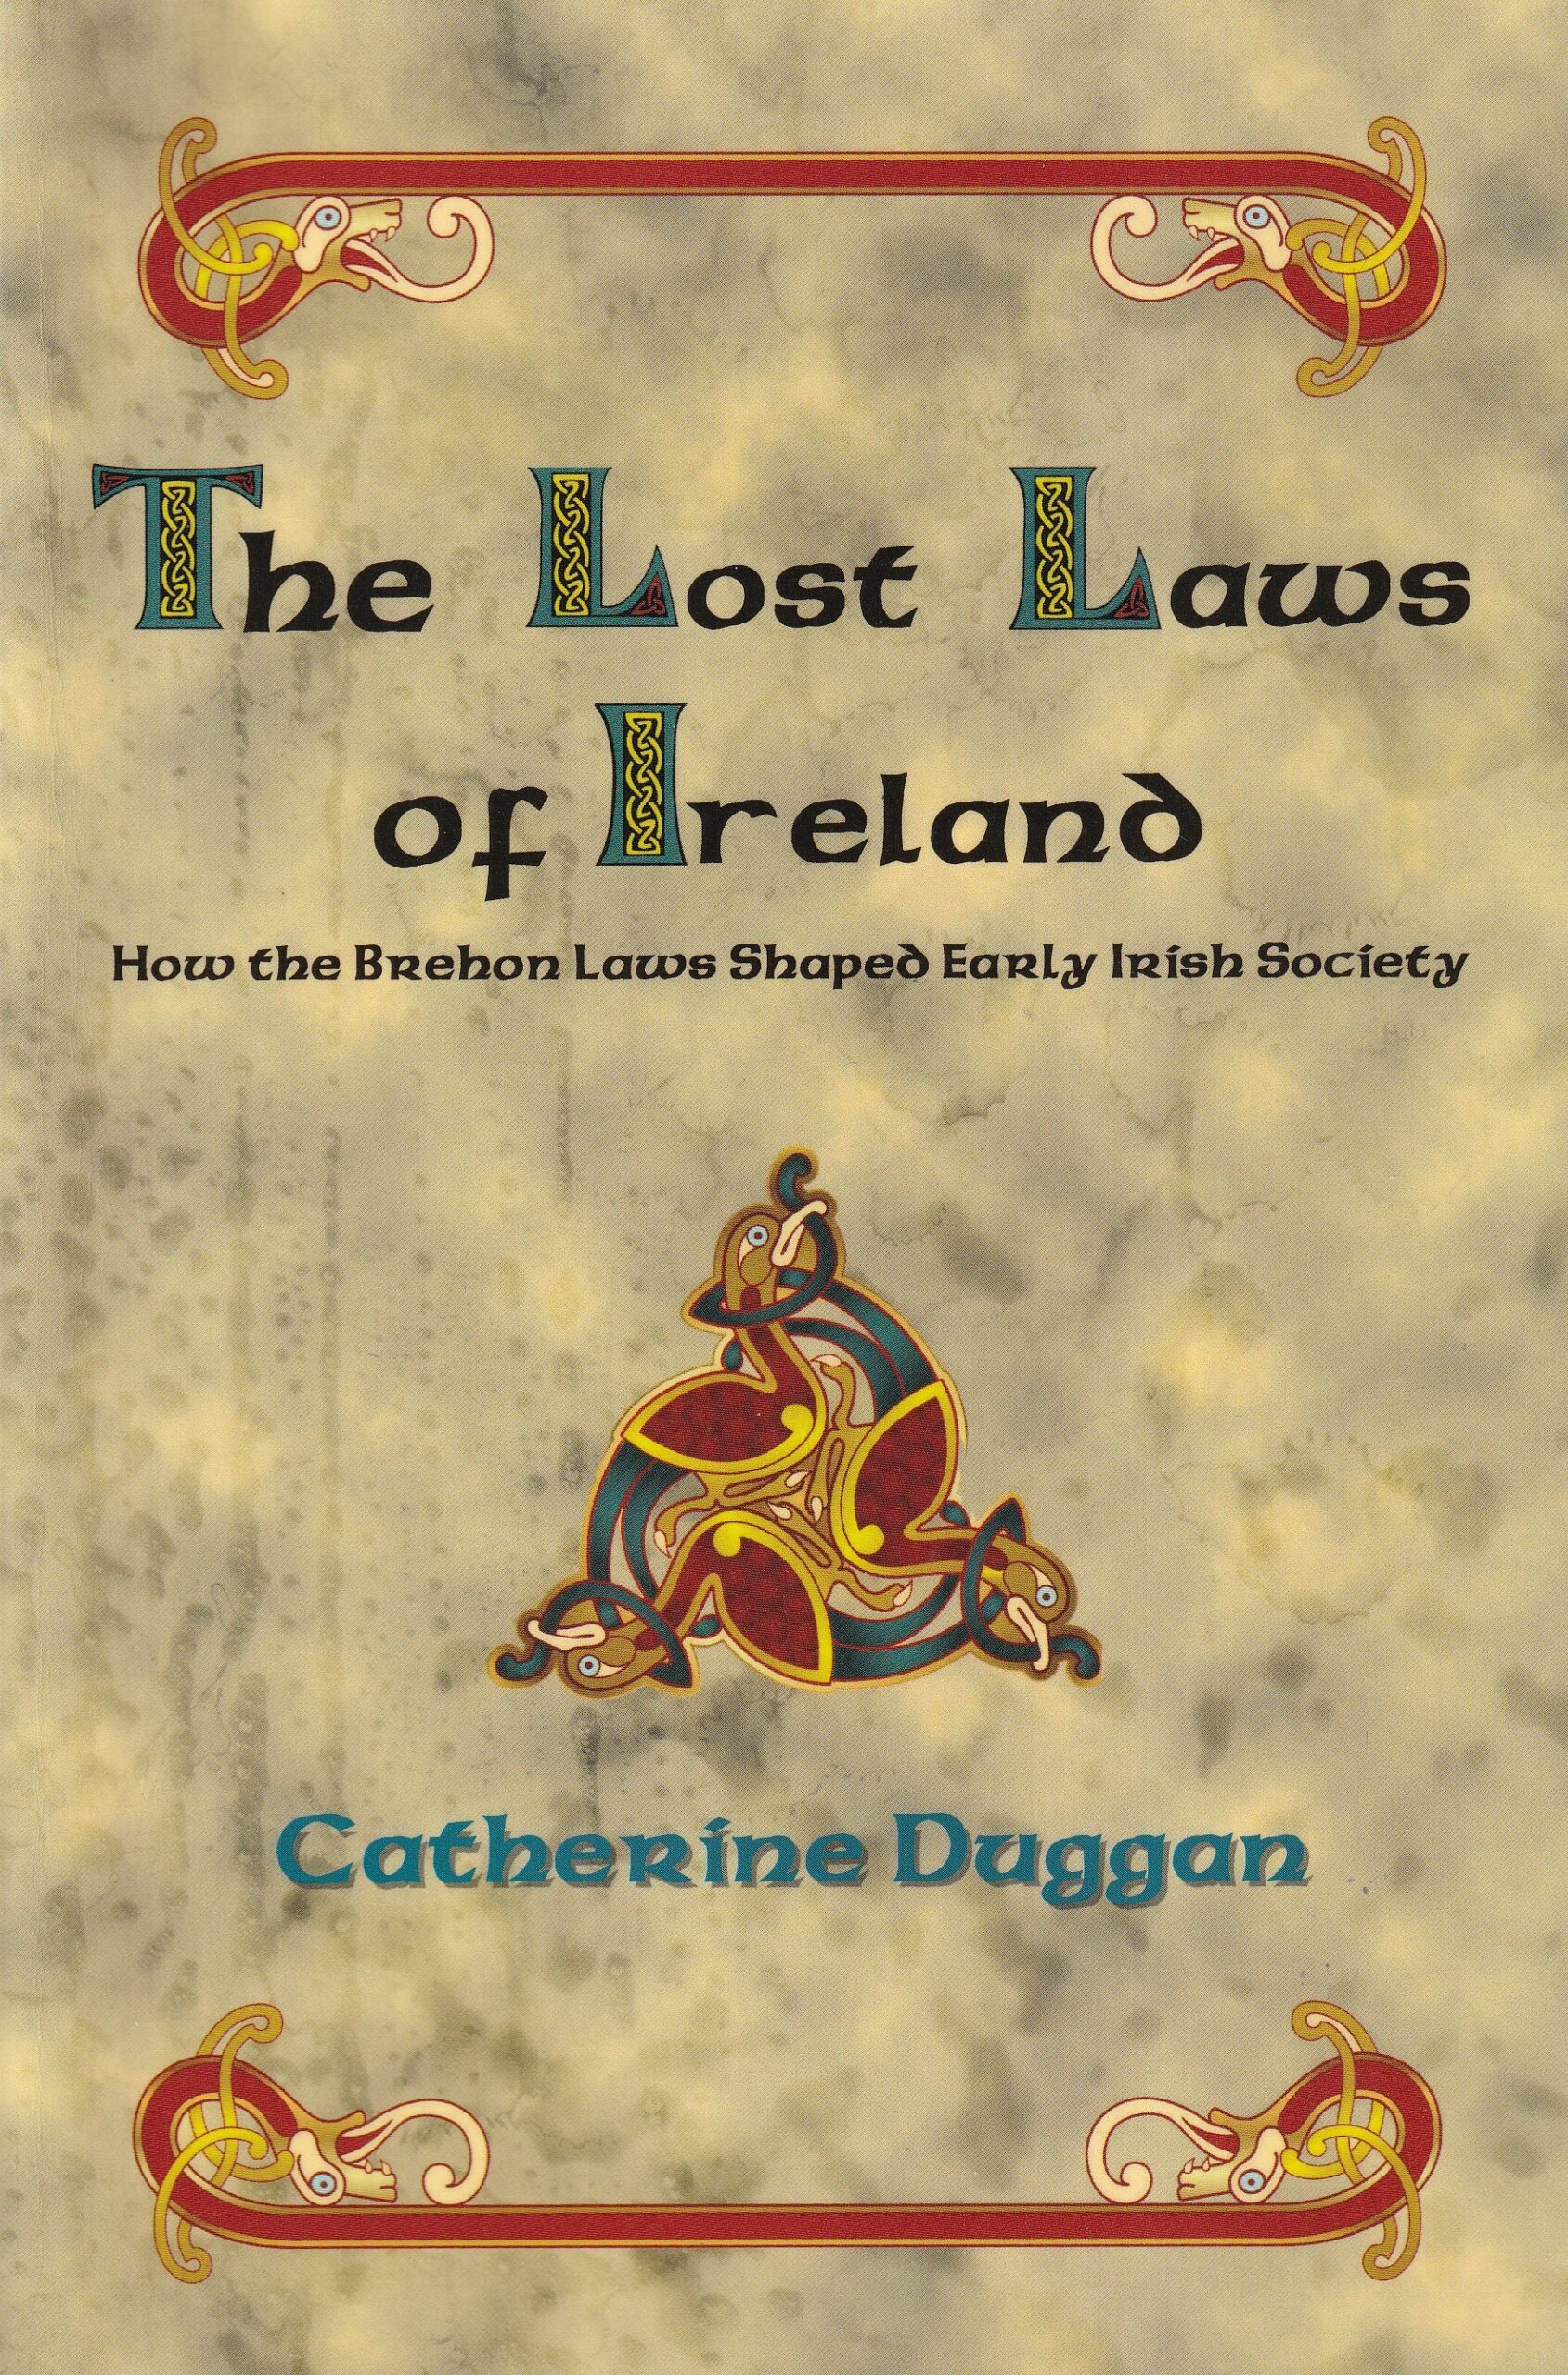 The Lost Laws of Ireland: How the Brehon Laws Shaped Early Irish Society | Catherine Duggan | Charlie Byrne's